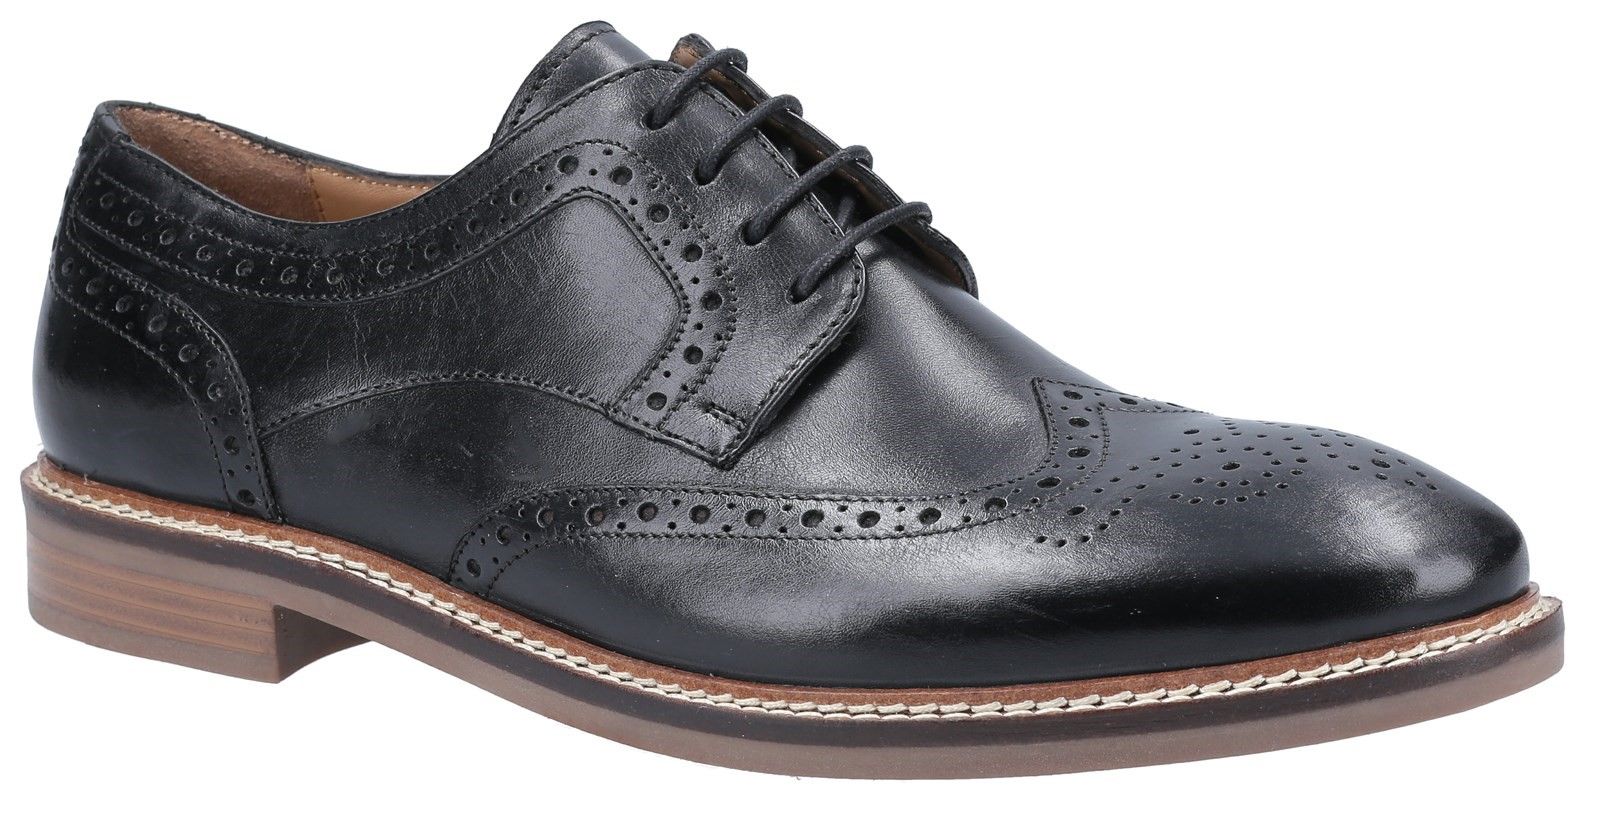 Men's wing-tip brogue shoe; Bryson is crafted with leather and has a comfortable cushioned memory foam leather footbed. The hardwearing TPR flexible sole unit makes this the perfect smart all day footwear.Leather upper with brogue detail. 
Leather lining. 
Cushion comfort memory foam leather sock. 
Flexible TPR sole with stacked effect heel and stitched leather rand detail.